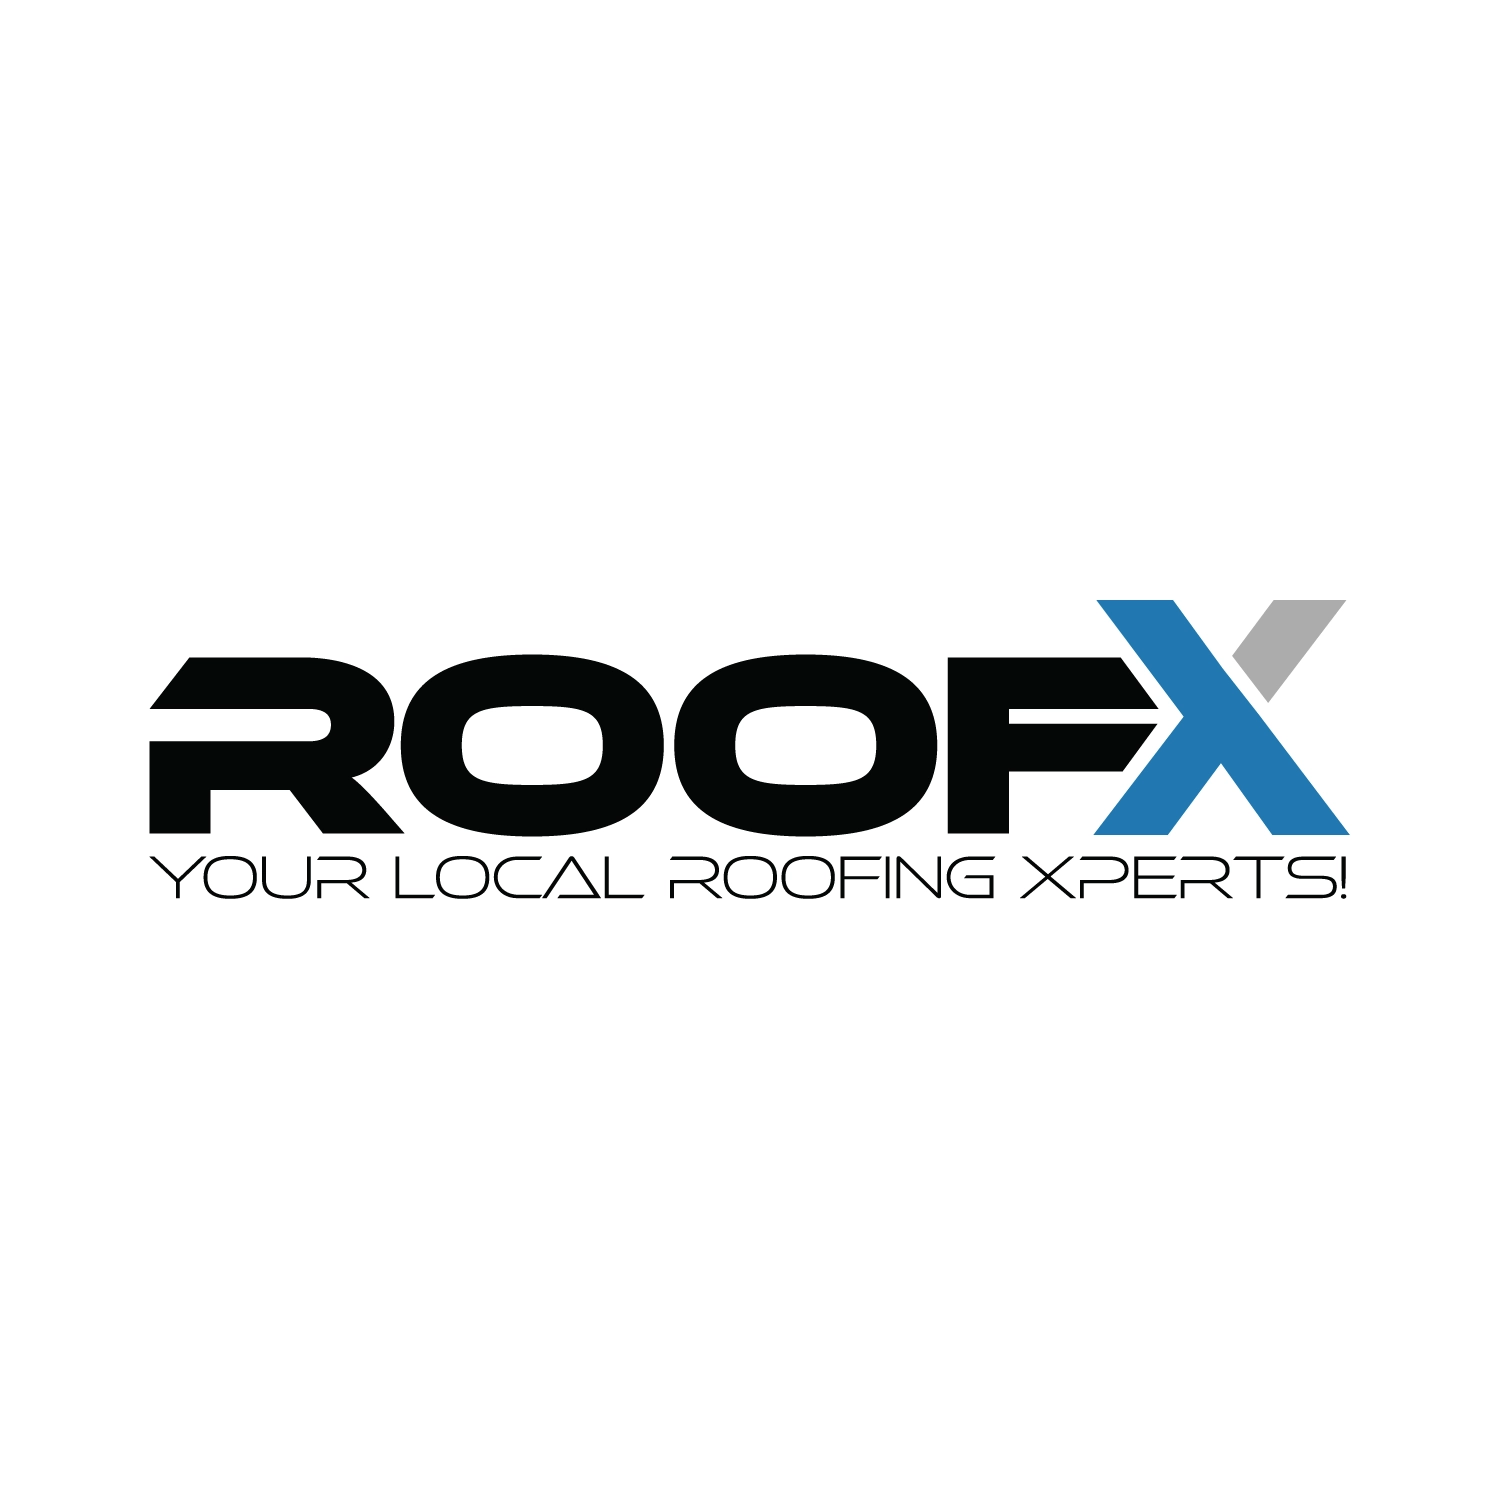 Roof X black and blue logo